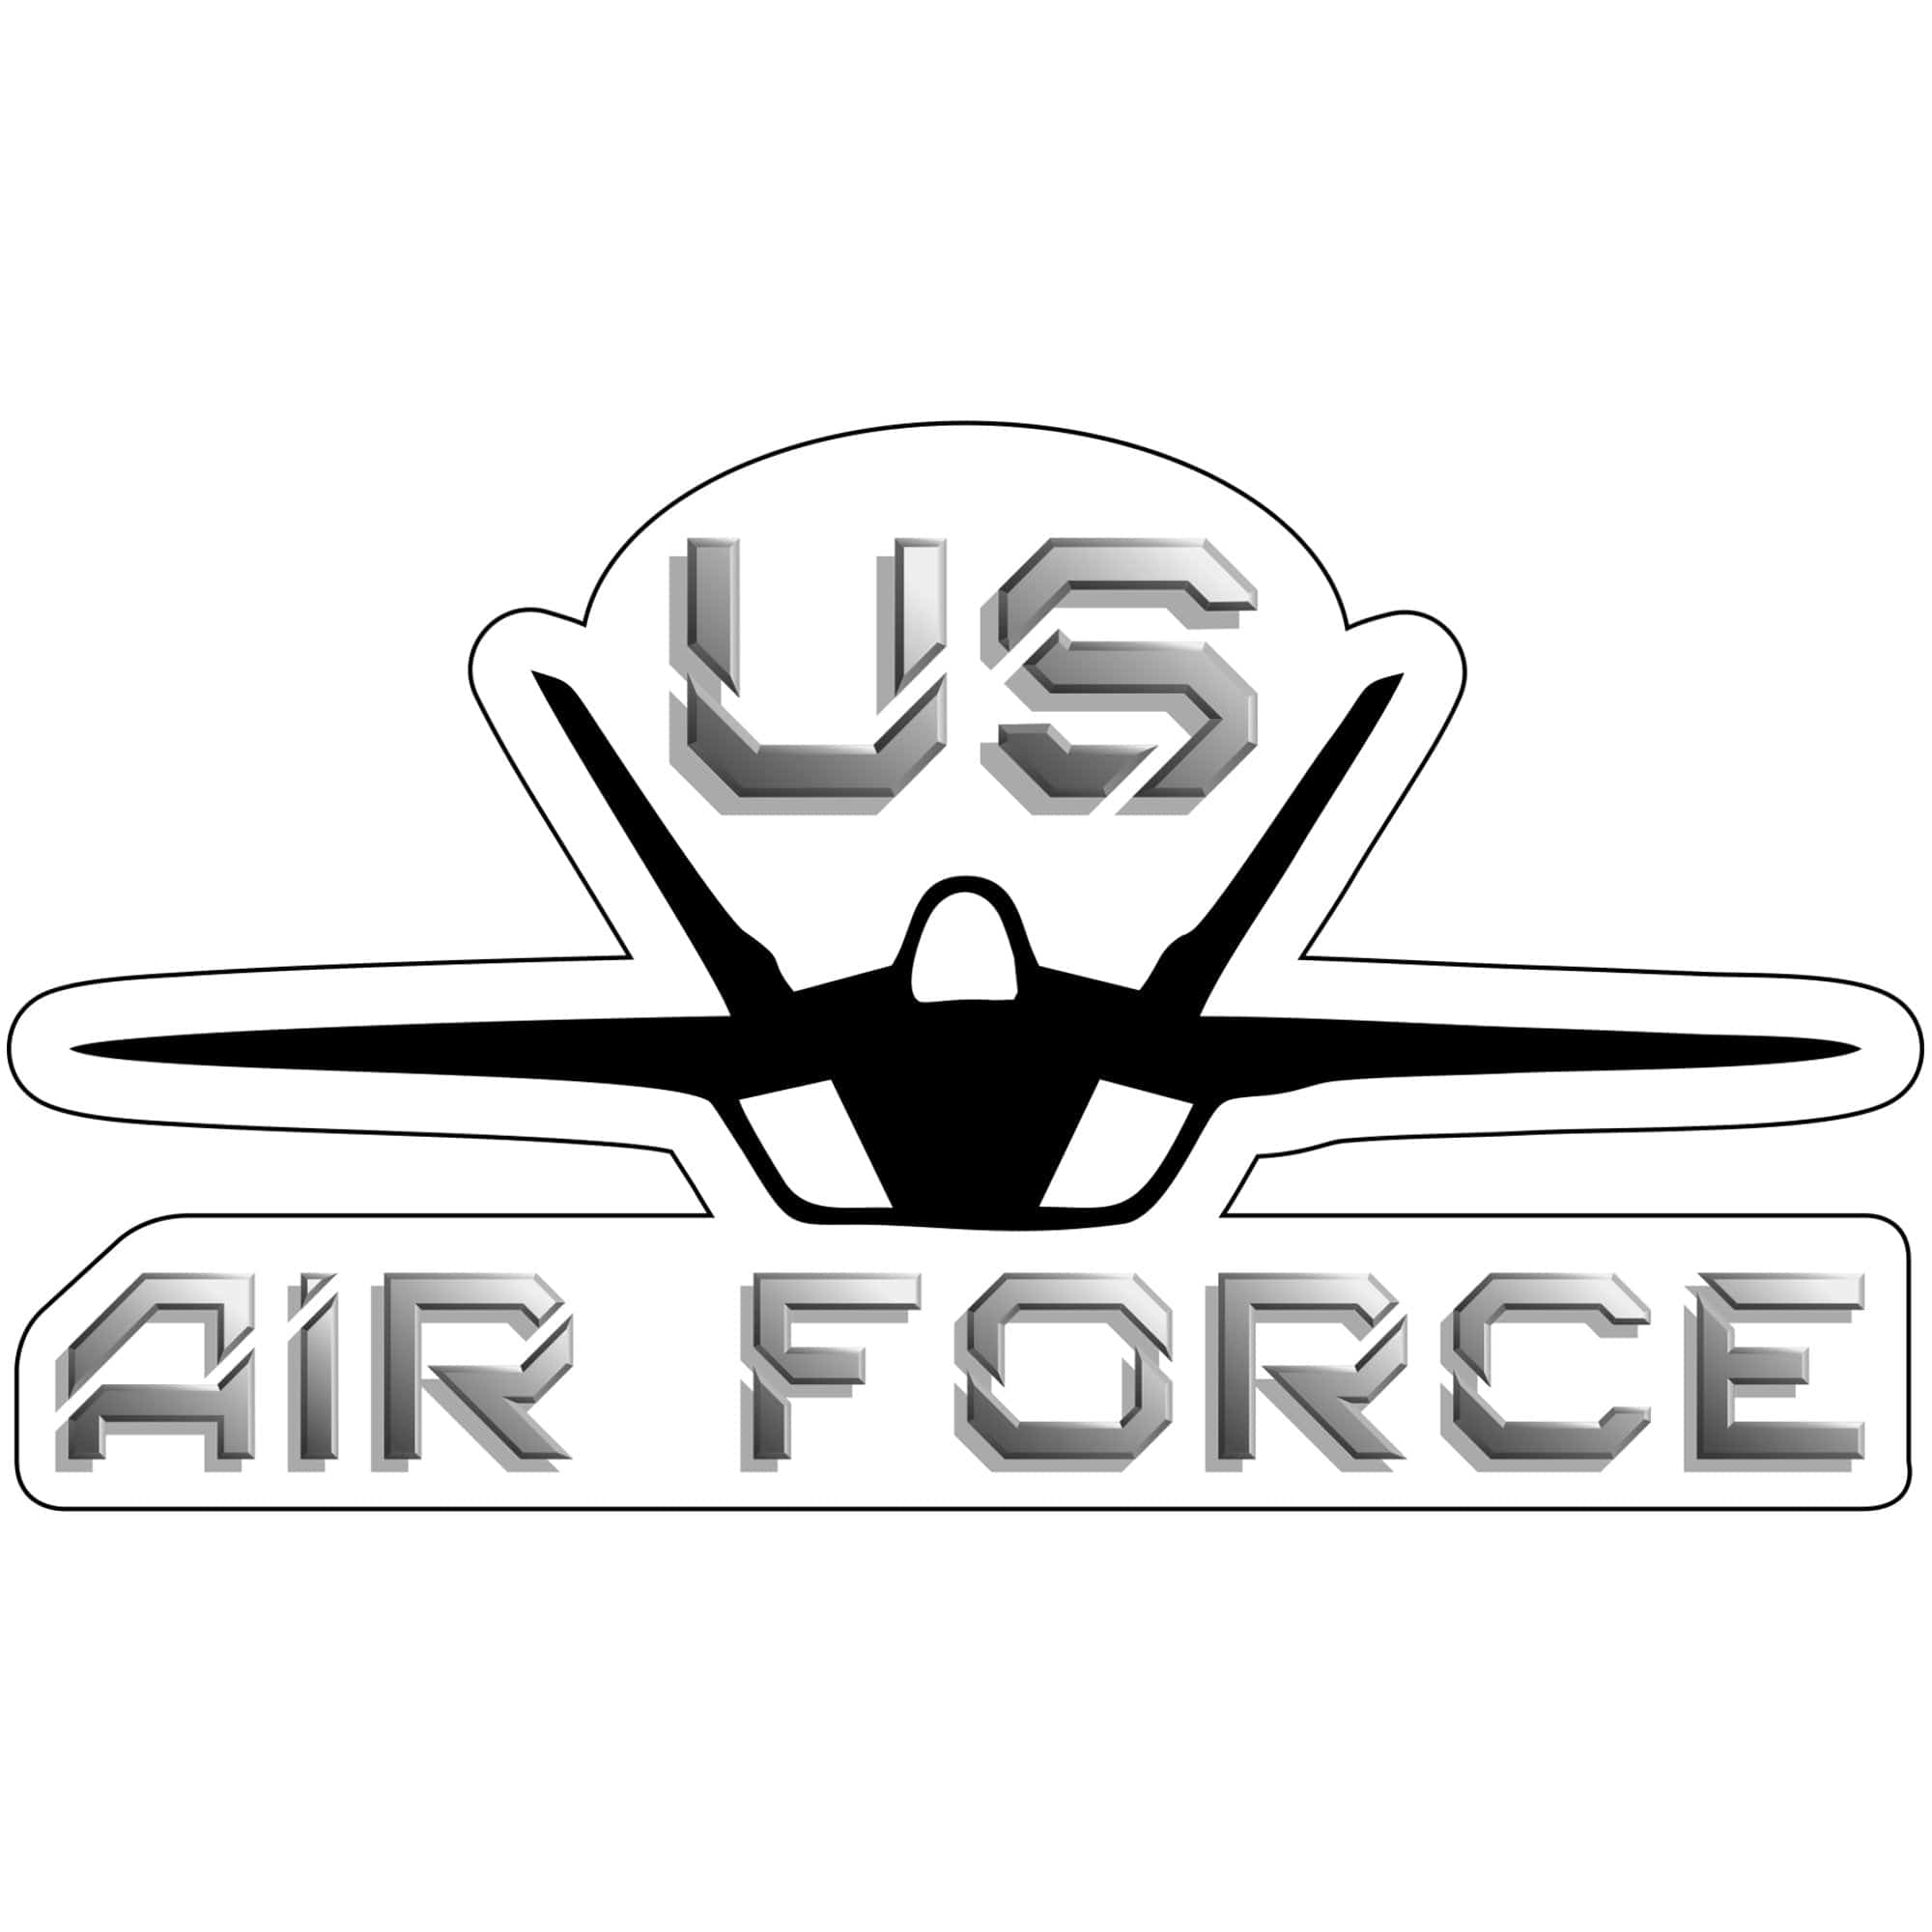 Tactical Gear Junkie Stickers United States Air Force Fighter Jet - 6x3.5 inch Sticker